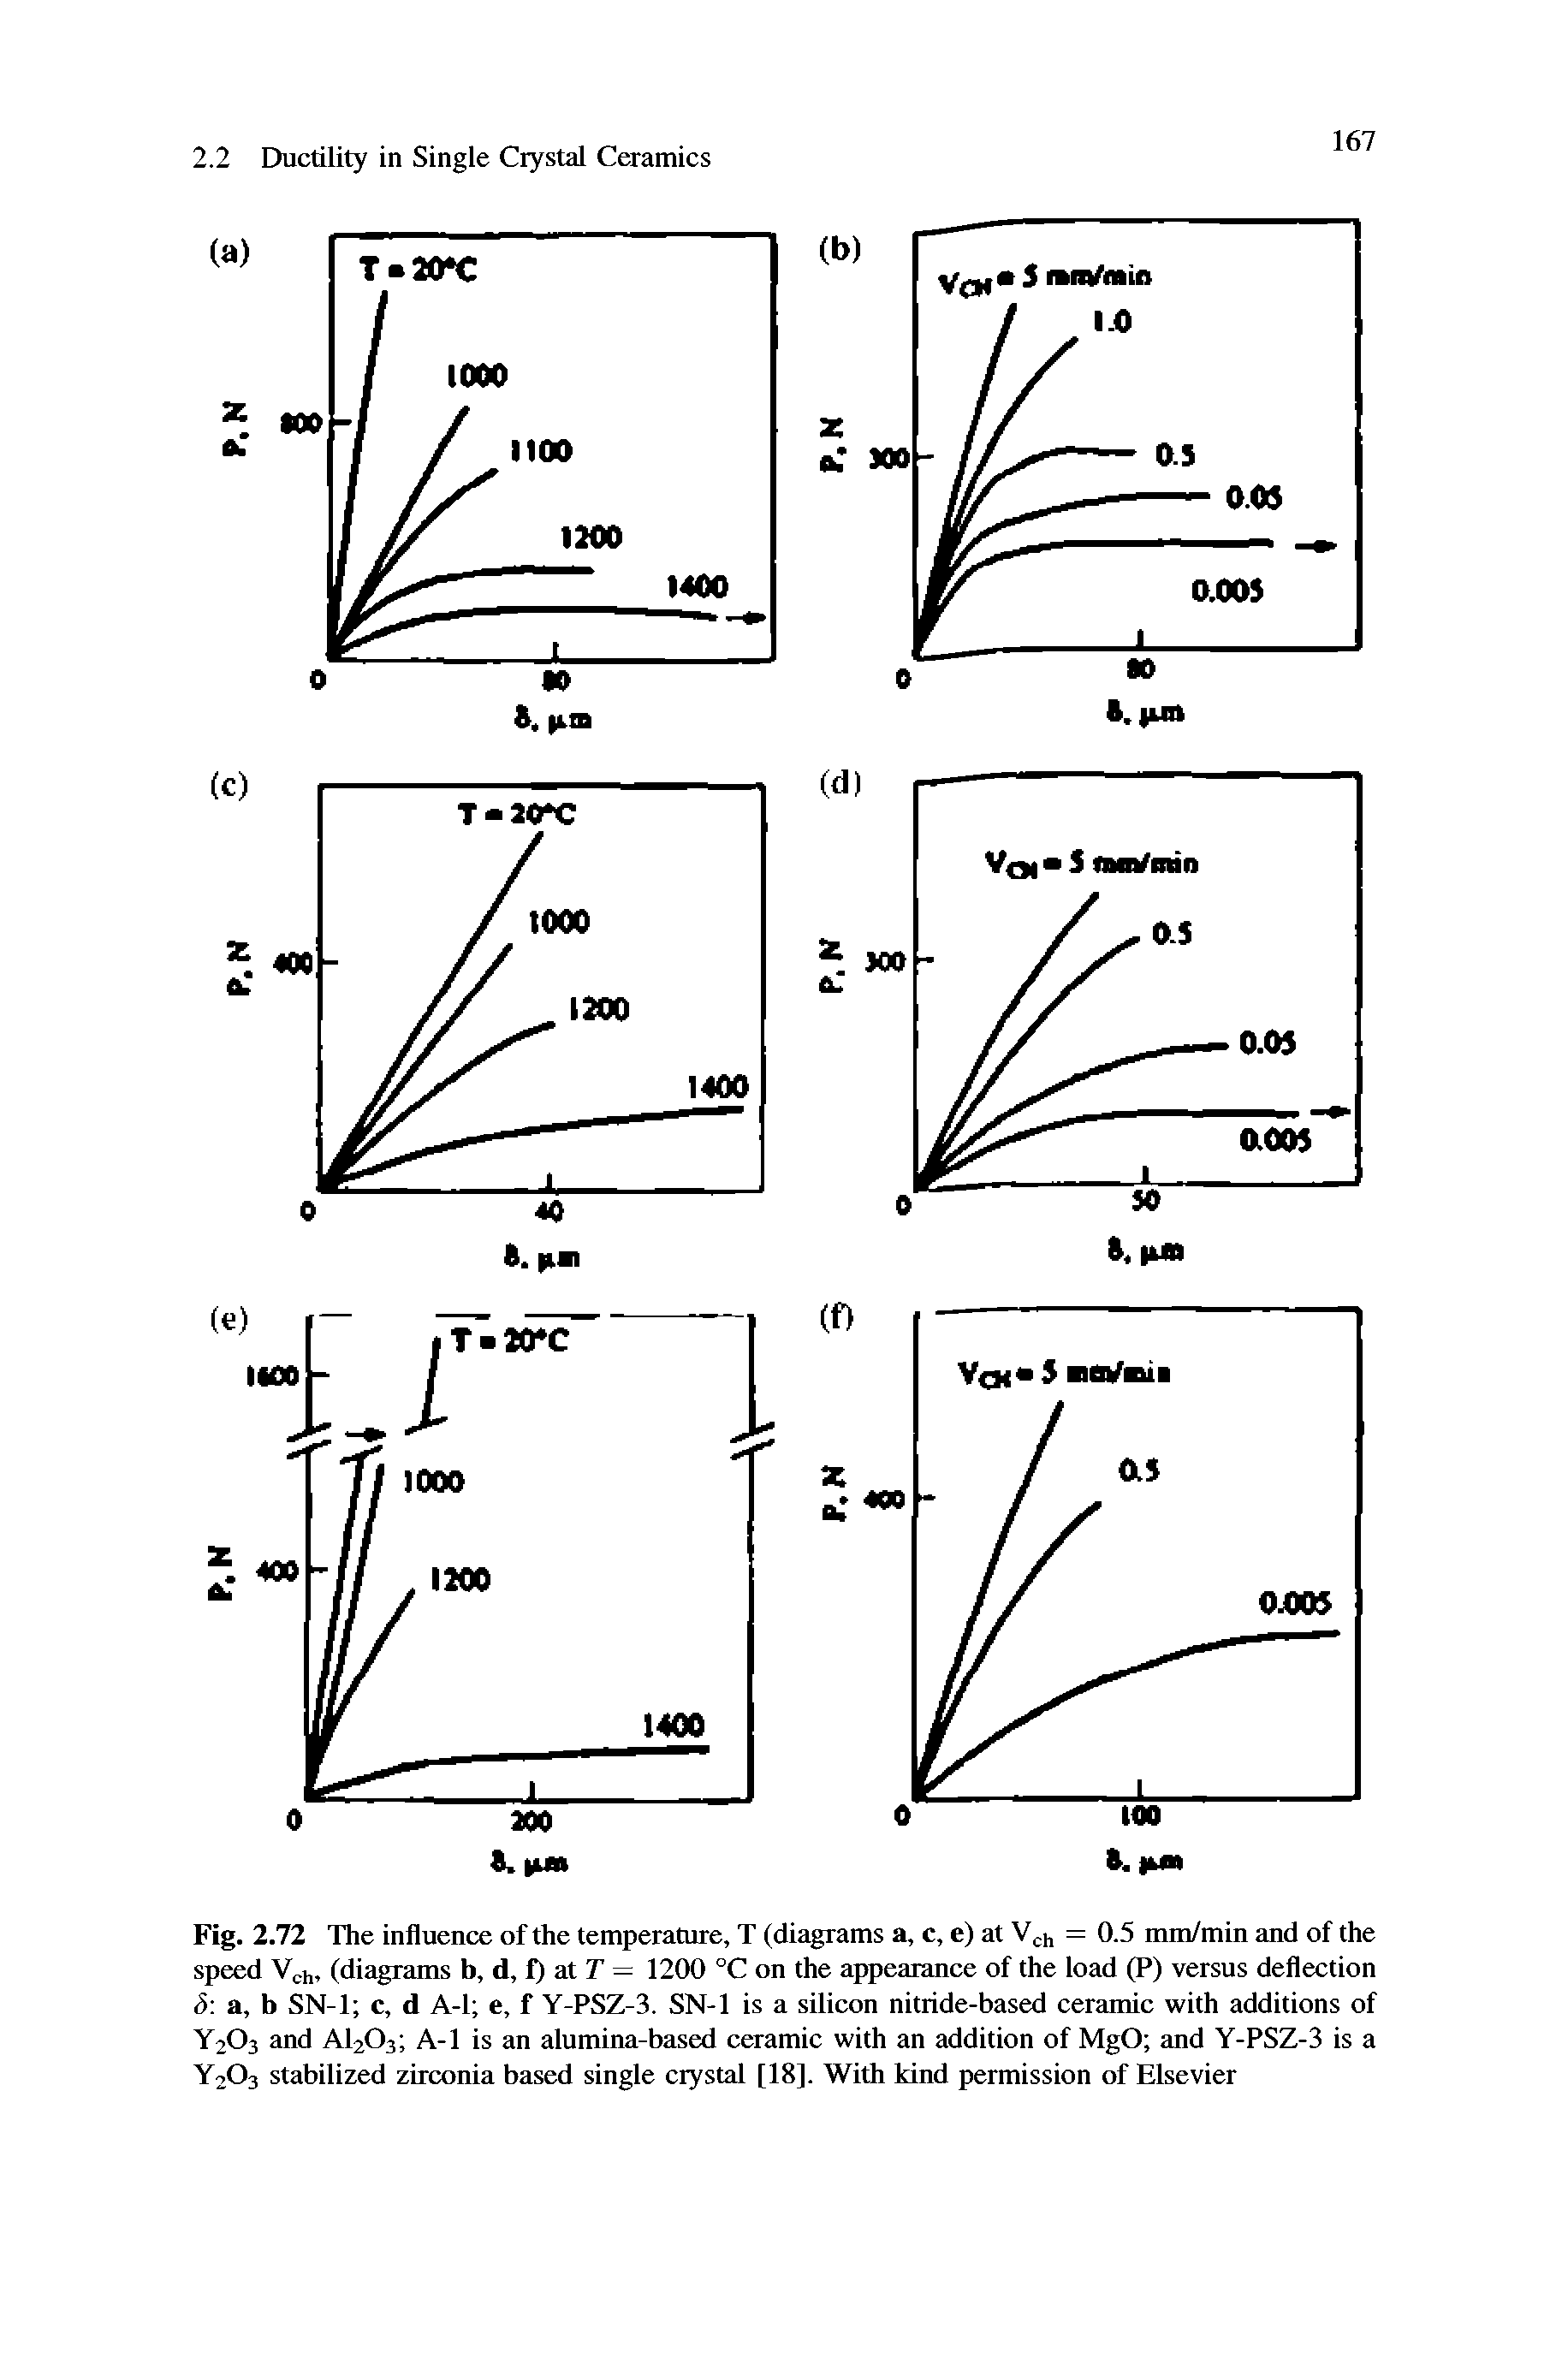 Fig. 2.72 The influence of the temperature, T (diagrams a, c, e) at V h = 0.5 mm/min and of the speed V<-h, (diagrams b, d, f) at T = 1200 °C on the appearance of the load (P) versus deflection <5 a, b SN-1 c, d A-1 e, f Y-PSZ-3. SN-1 is a silicon nitride-based ceramic with additions of Y2O3 and AI2O3 A-1 is an alumina-based ceramic with an addition of MgO and Y-PSZ-3 is a Y2O3 stabilized zirconia based single crystal [18]. With kind permission of Elsevier...